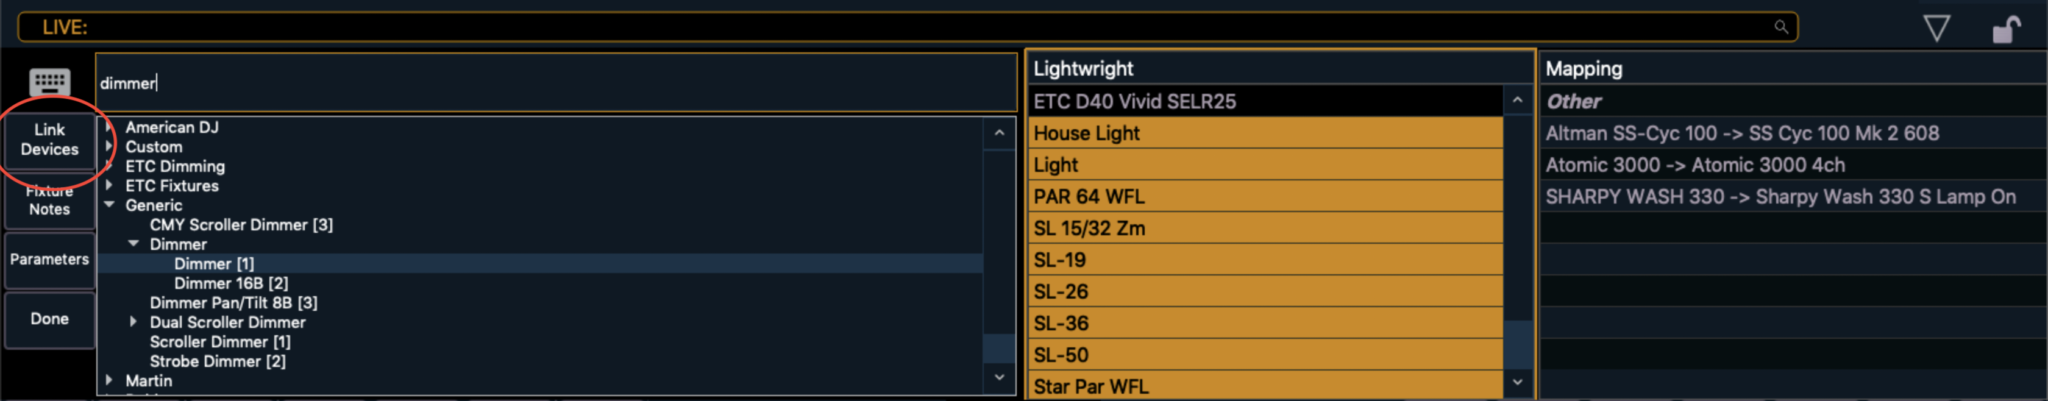 lightwright console link feature